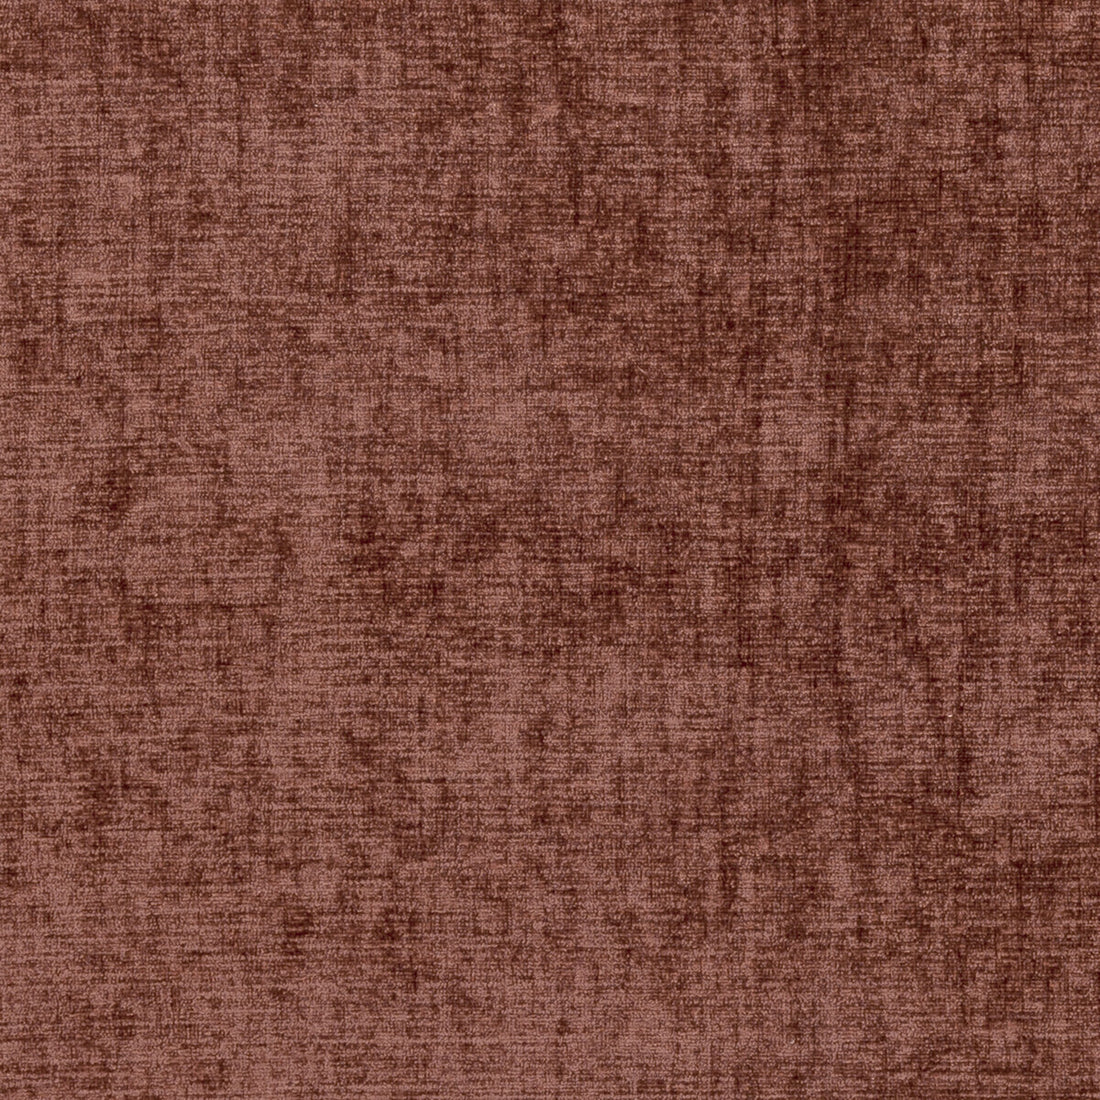 Karina fabric in chocolate color - pattern F0371/11.CAC.0 - by Clarke And Clarke in the Clarke &amp; Clarke Karina collection